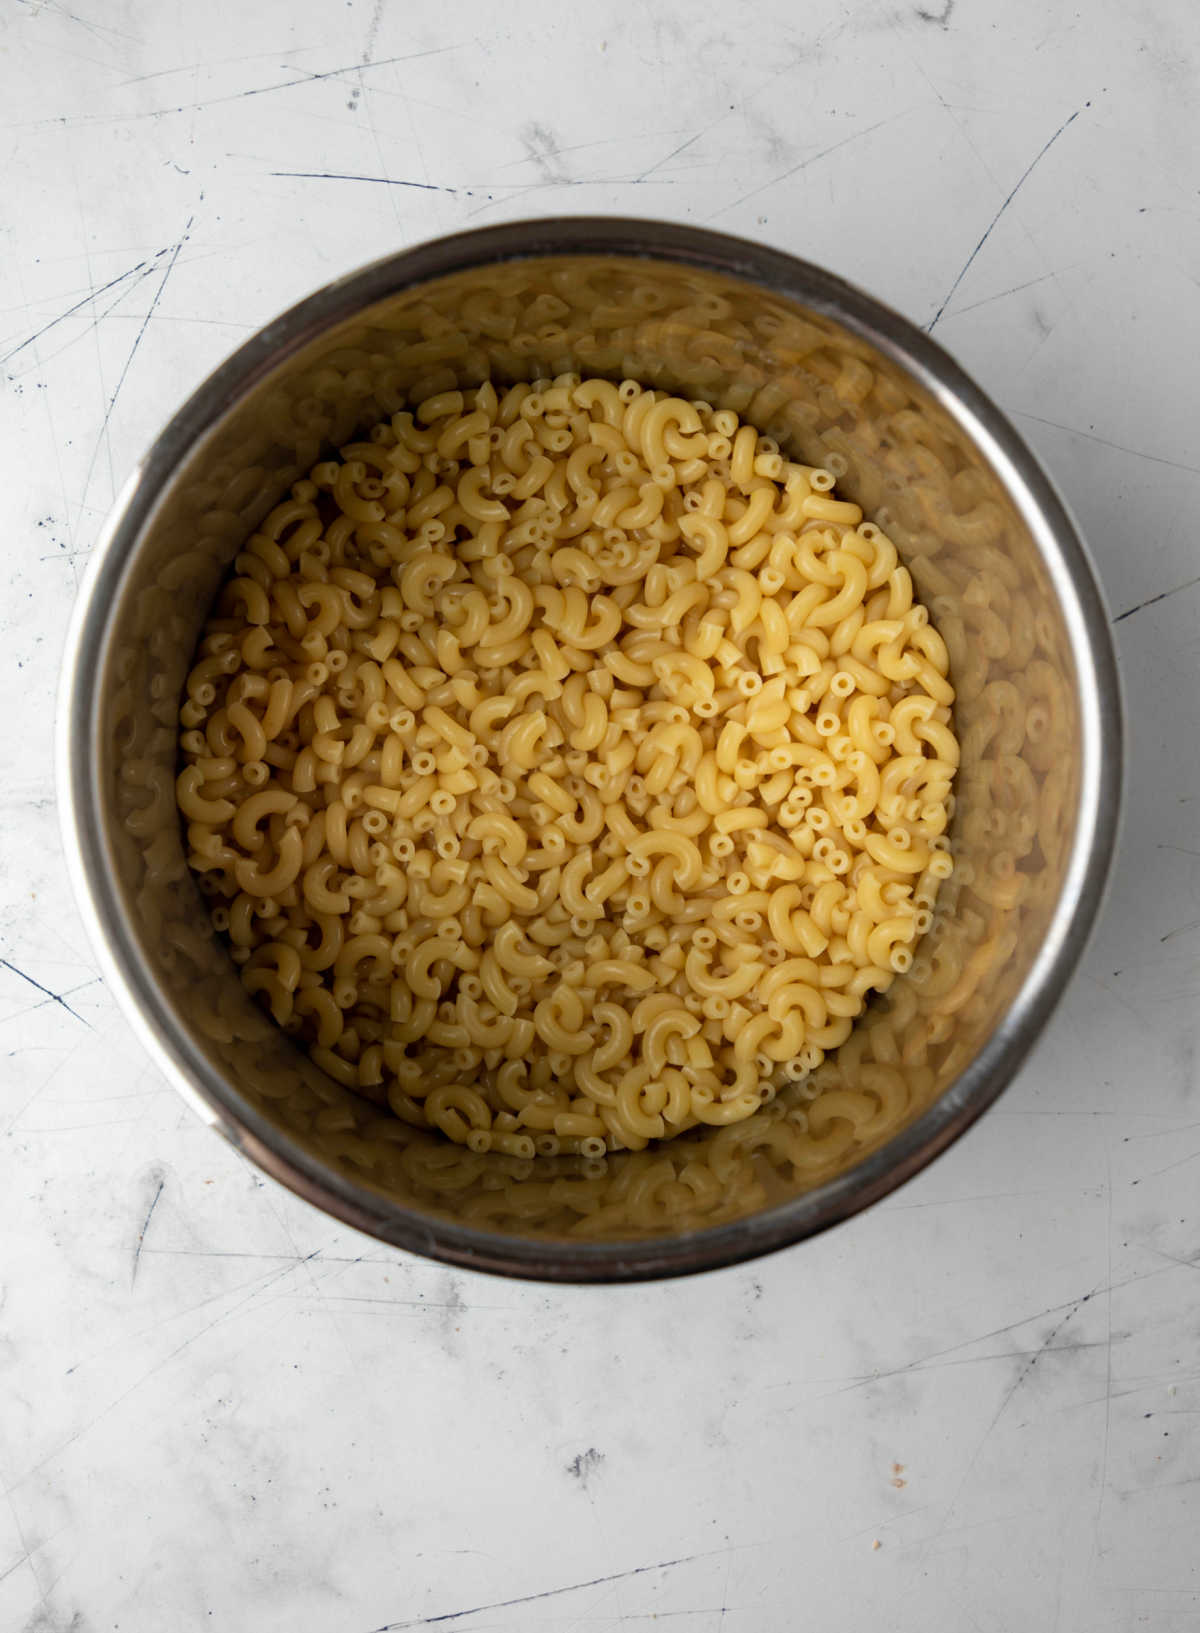 Cooked elbow macaroni in an instant pot inner pot.